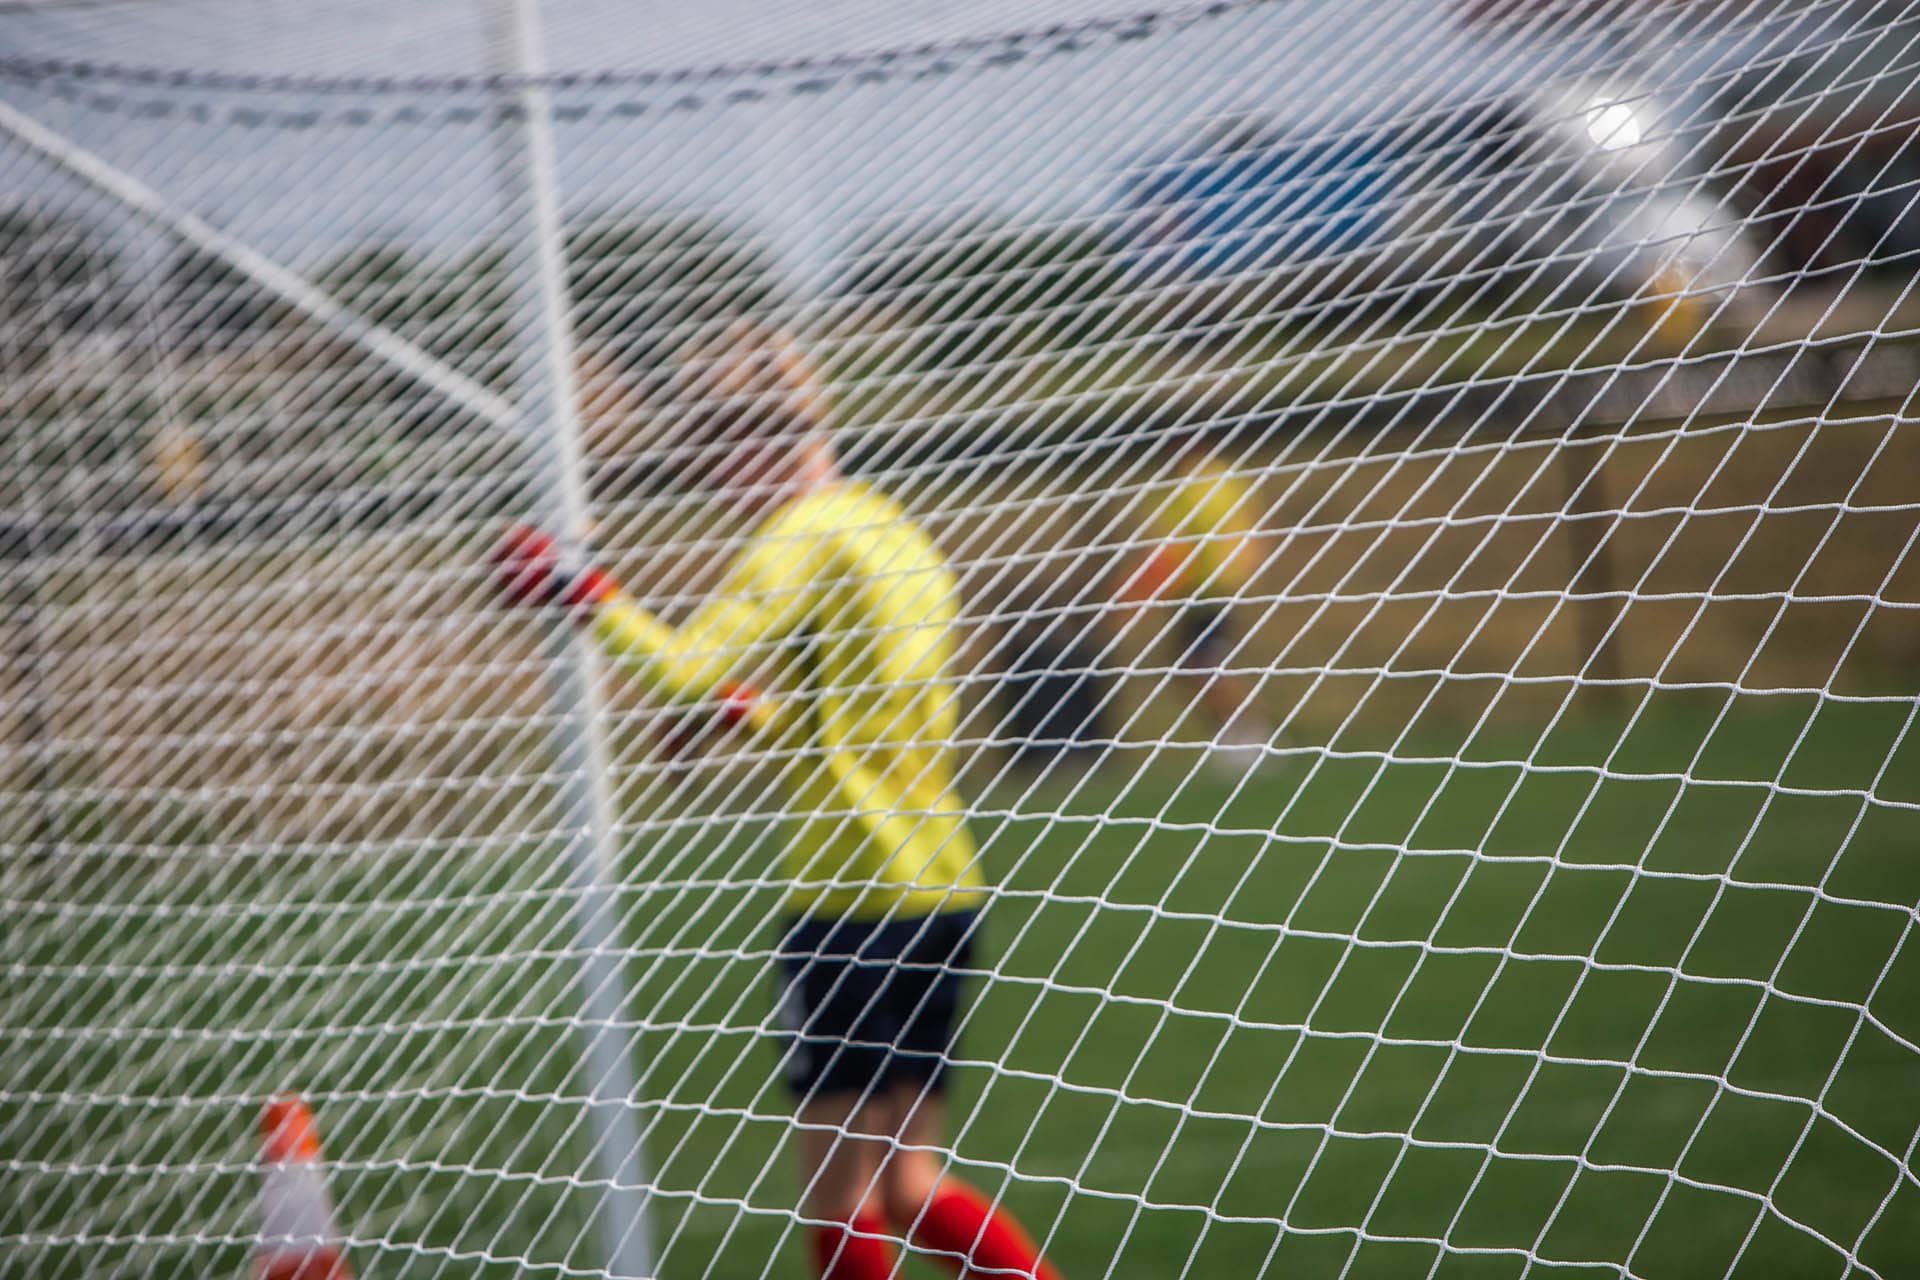 Soccer net with goalie in background.